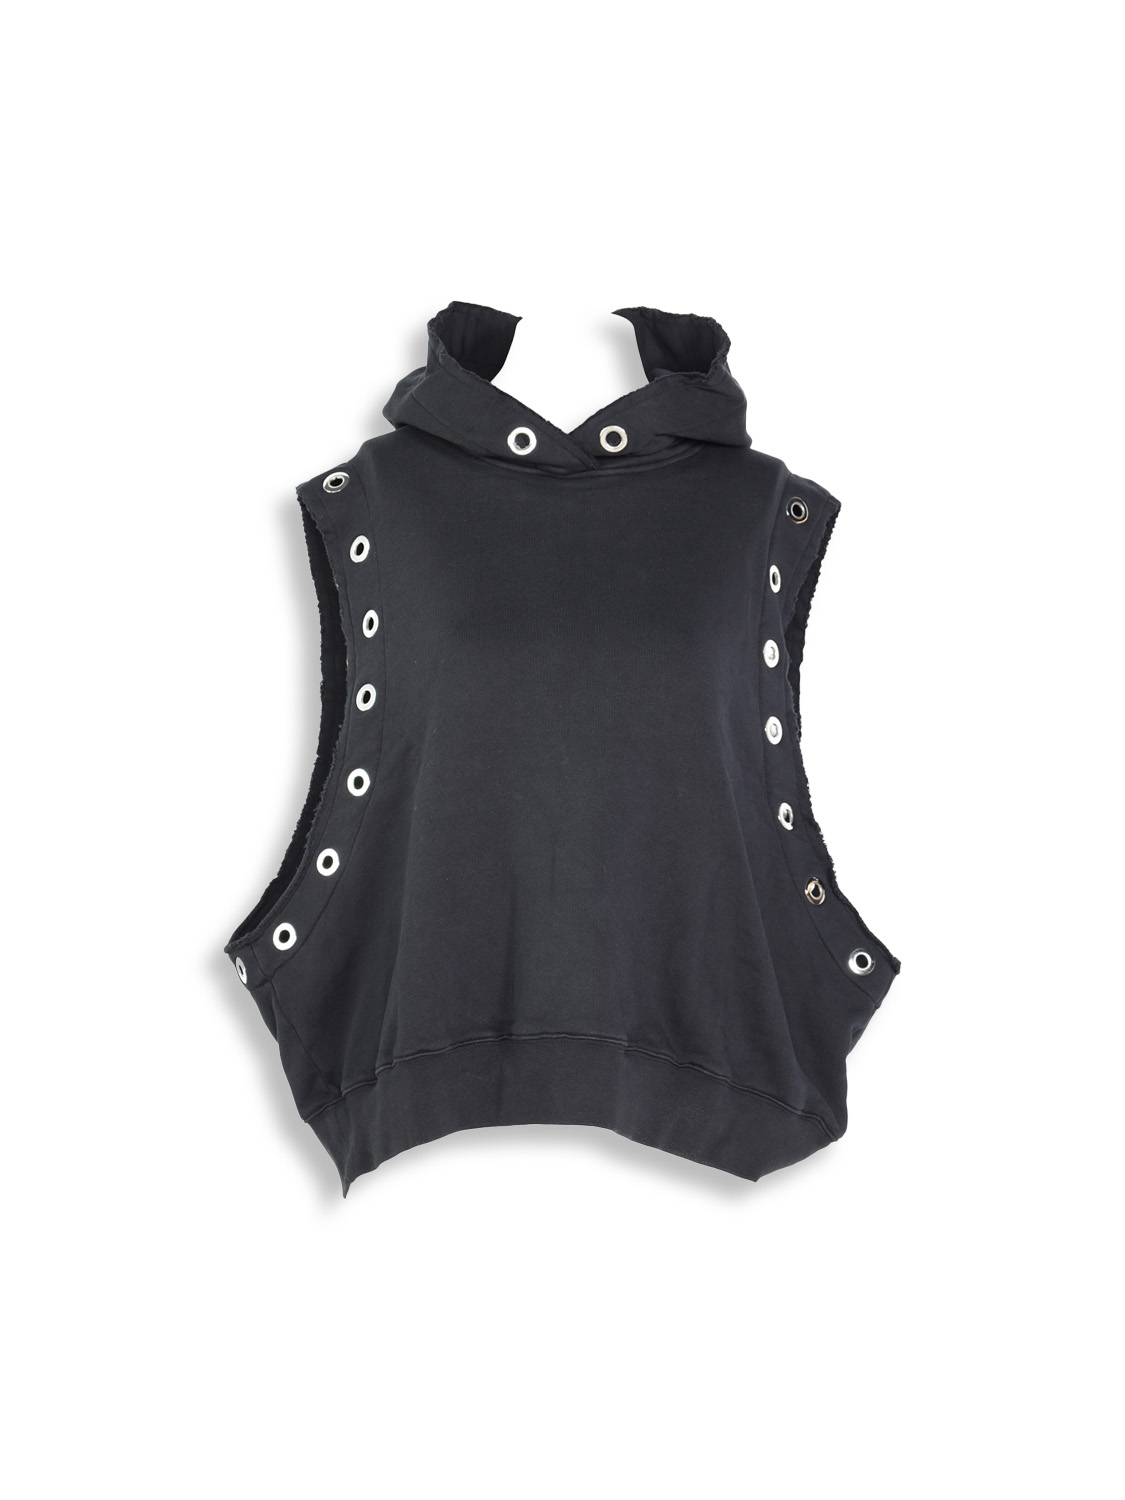 Hooded Top Sleeveless with Hole Details 